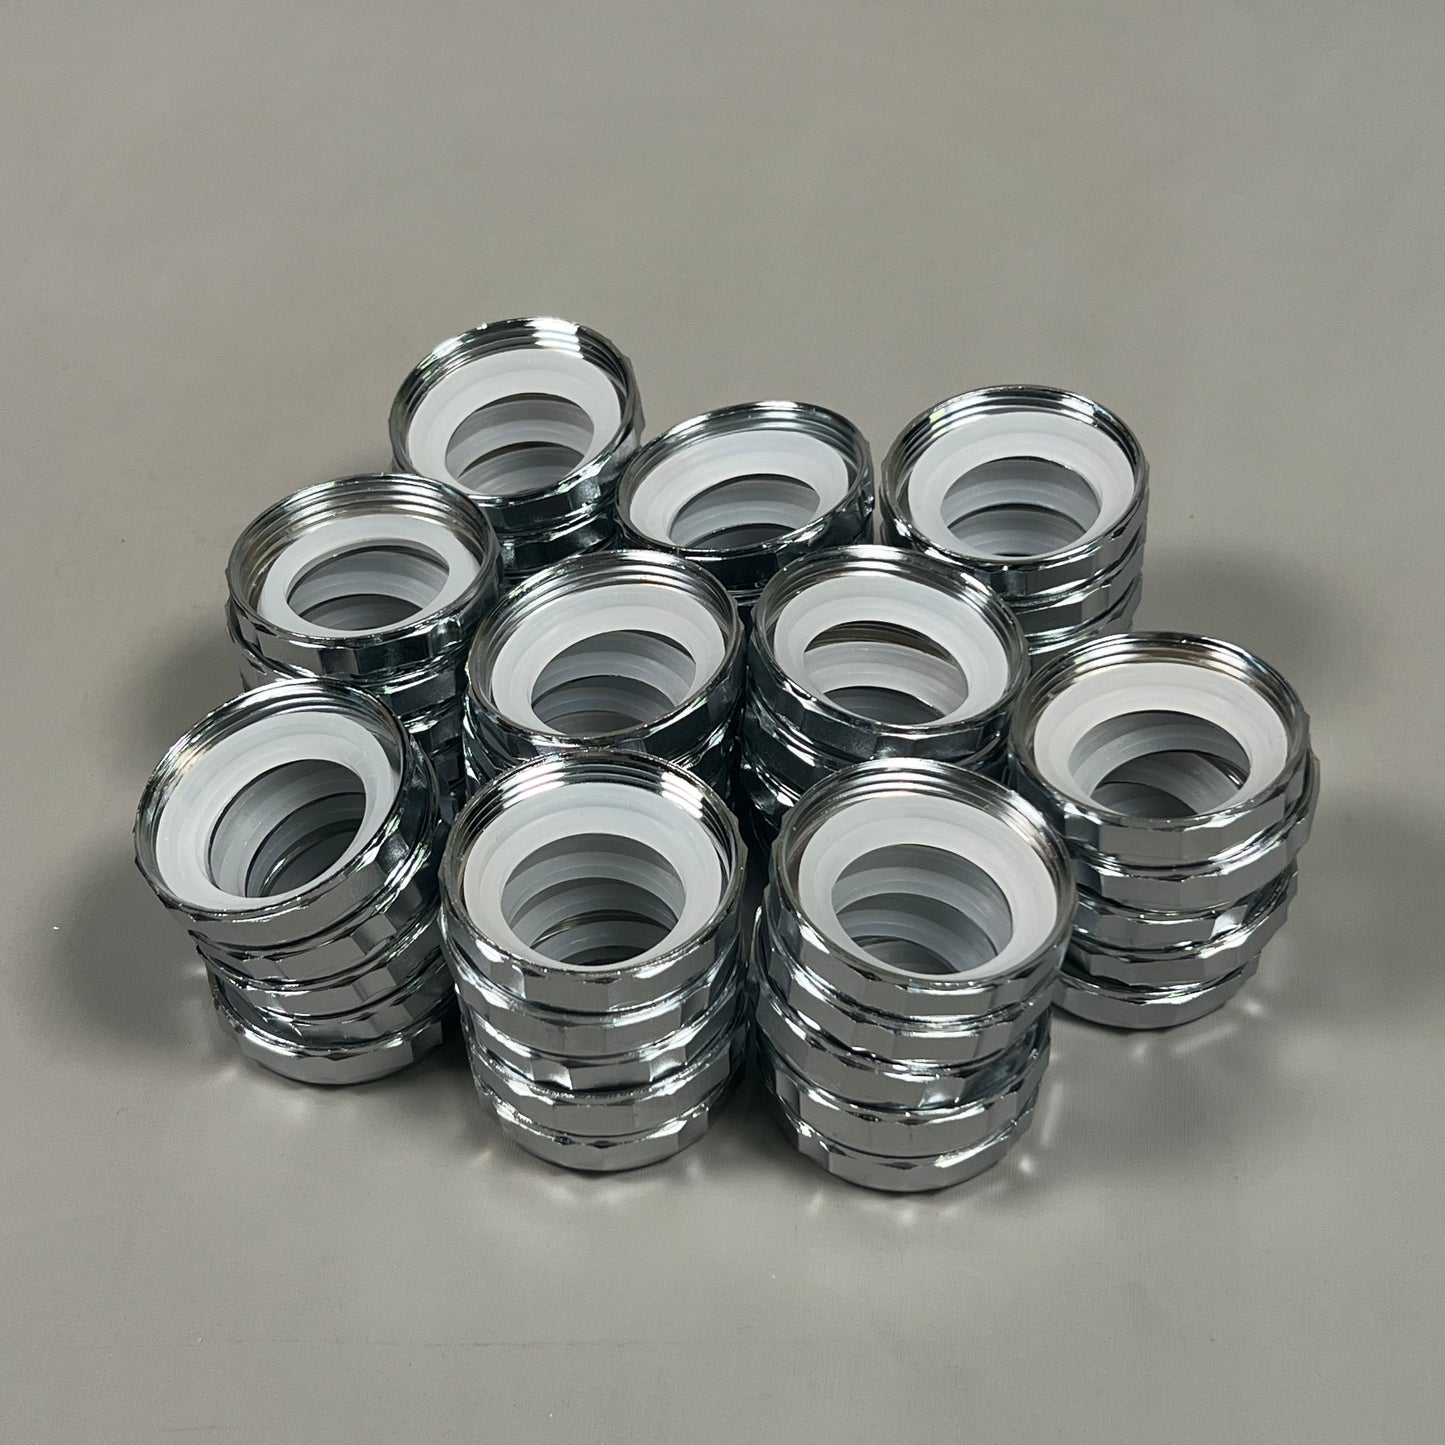 ACE 50-PACK of Sink Drain Metal Slip Joint Nut & Reducing Washer 1-1/2" x 1-1/4" (New)